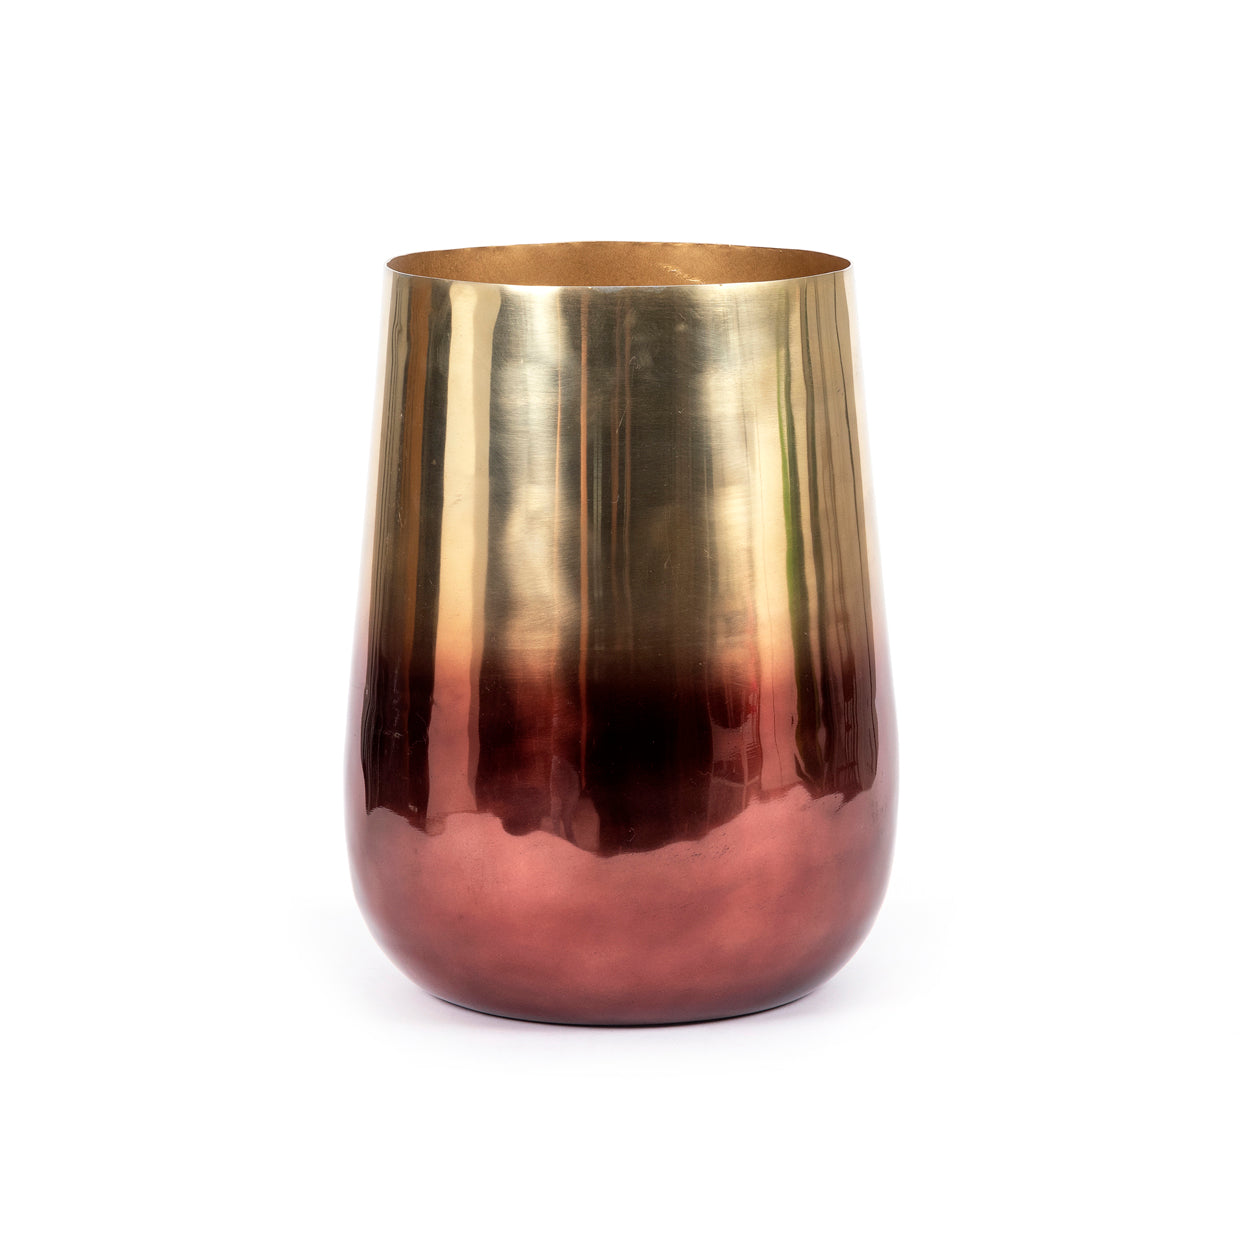 THE TWO TONE Brass Planter one pieces